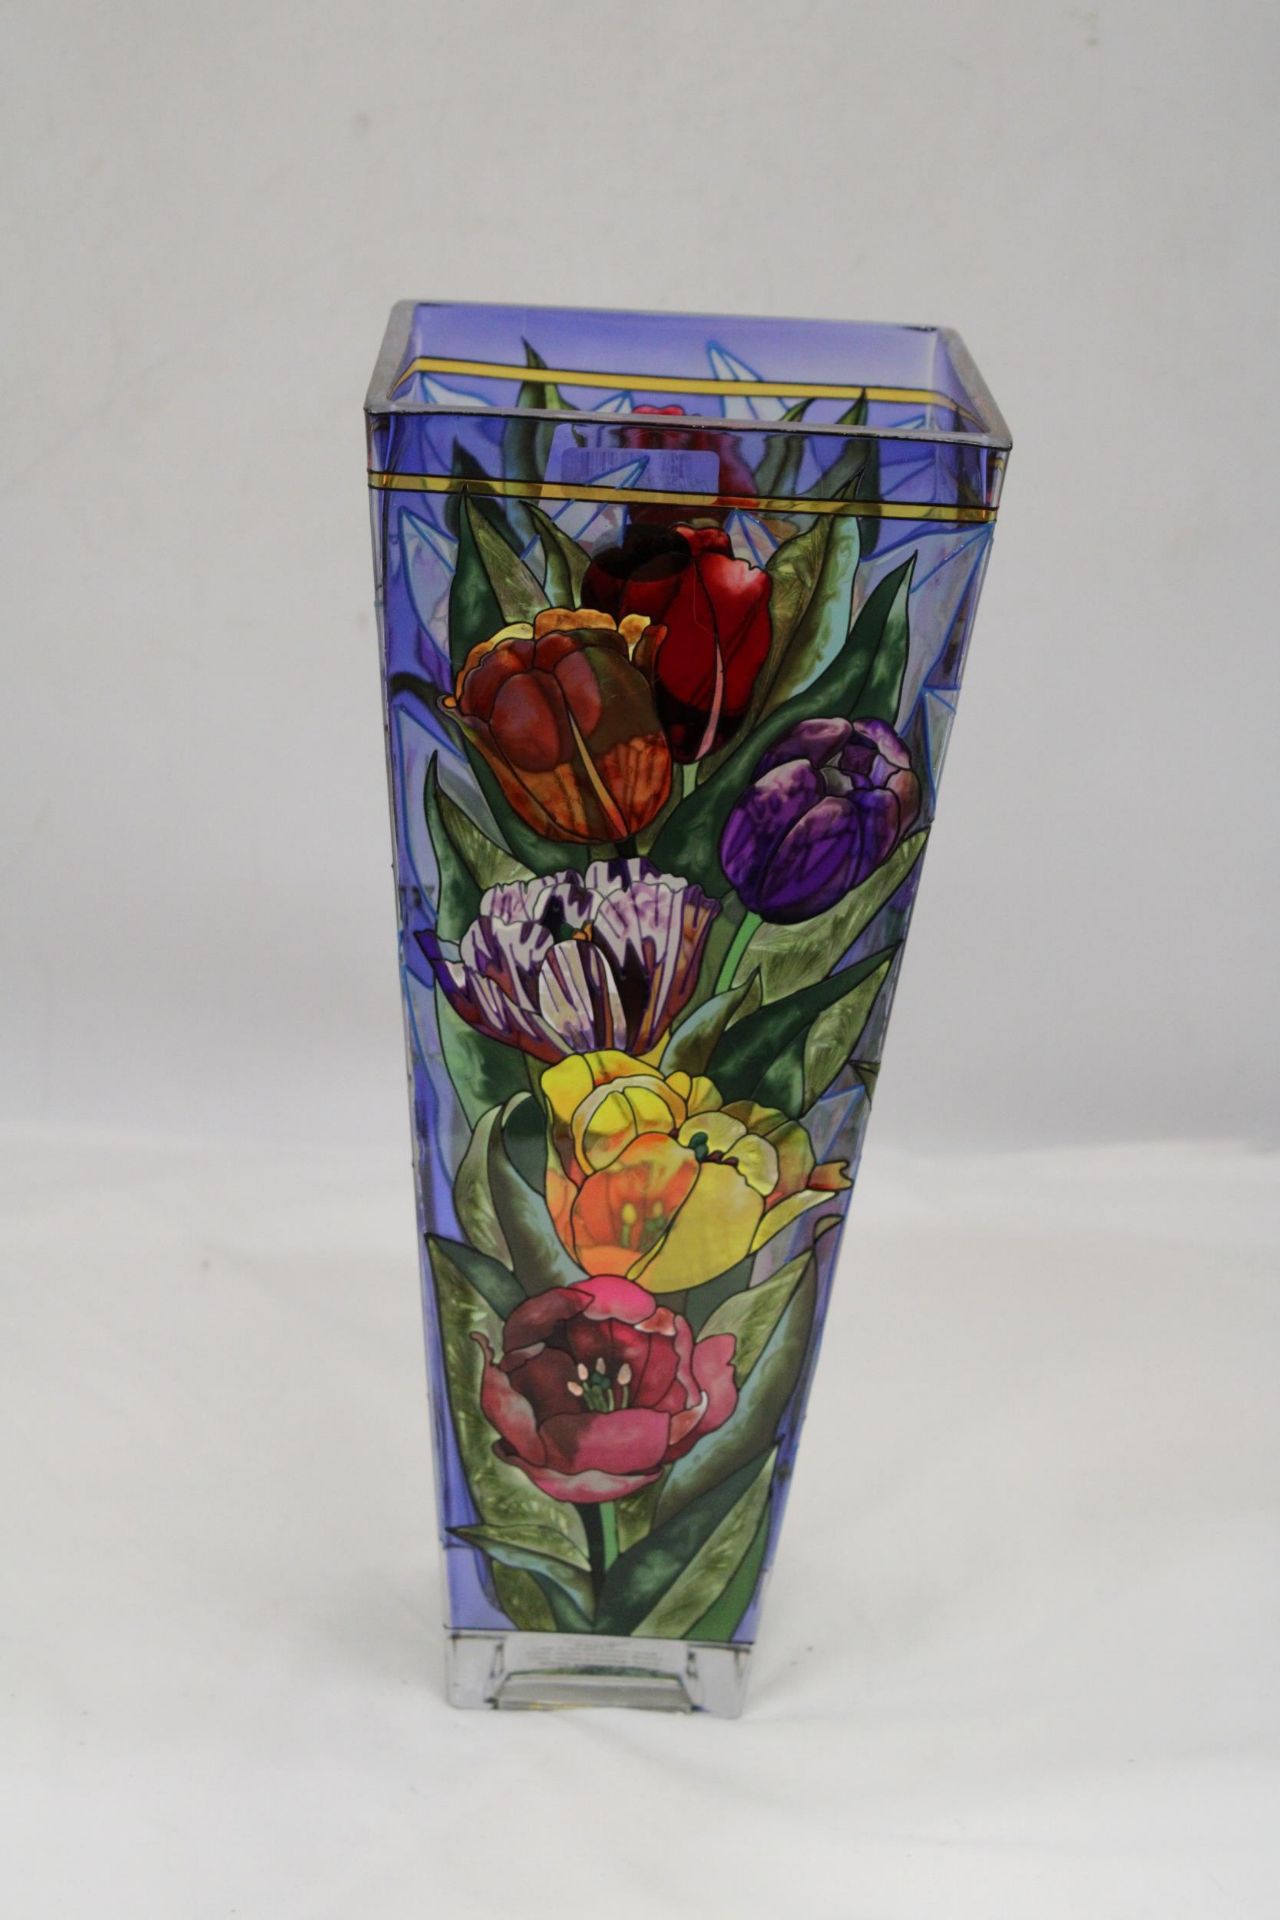 A LARGE HANDPAINTED GLASS VASE, HEIGHT 34CM - Image 4 of 6